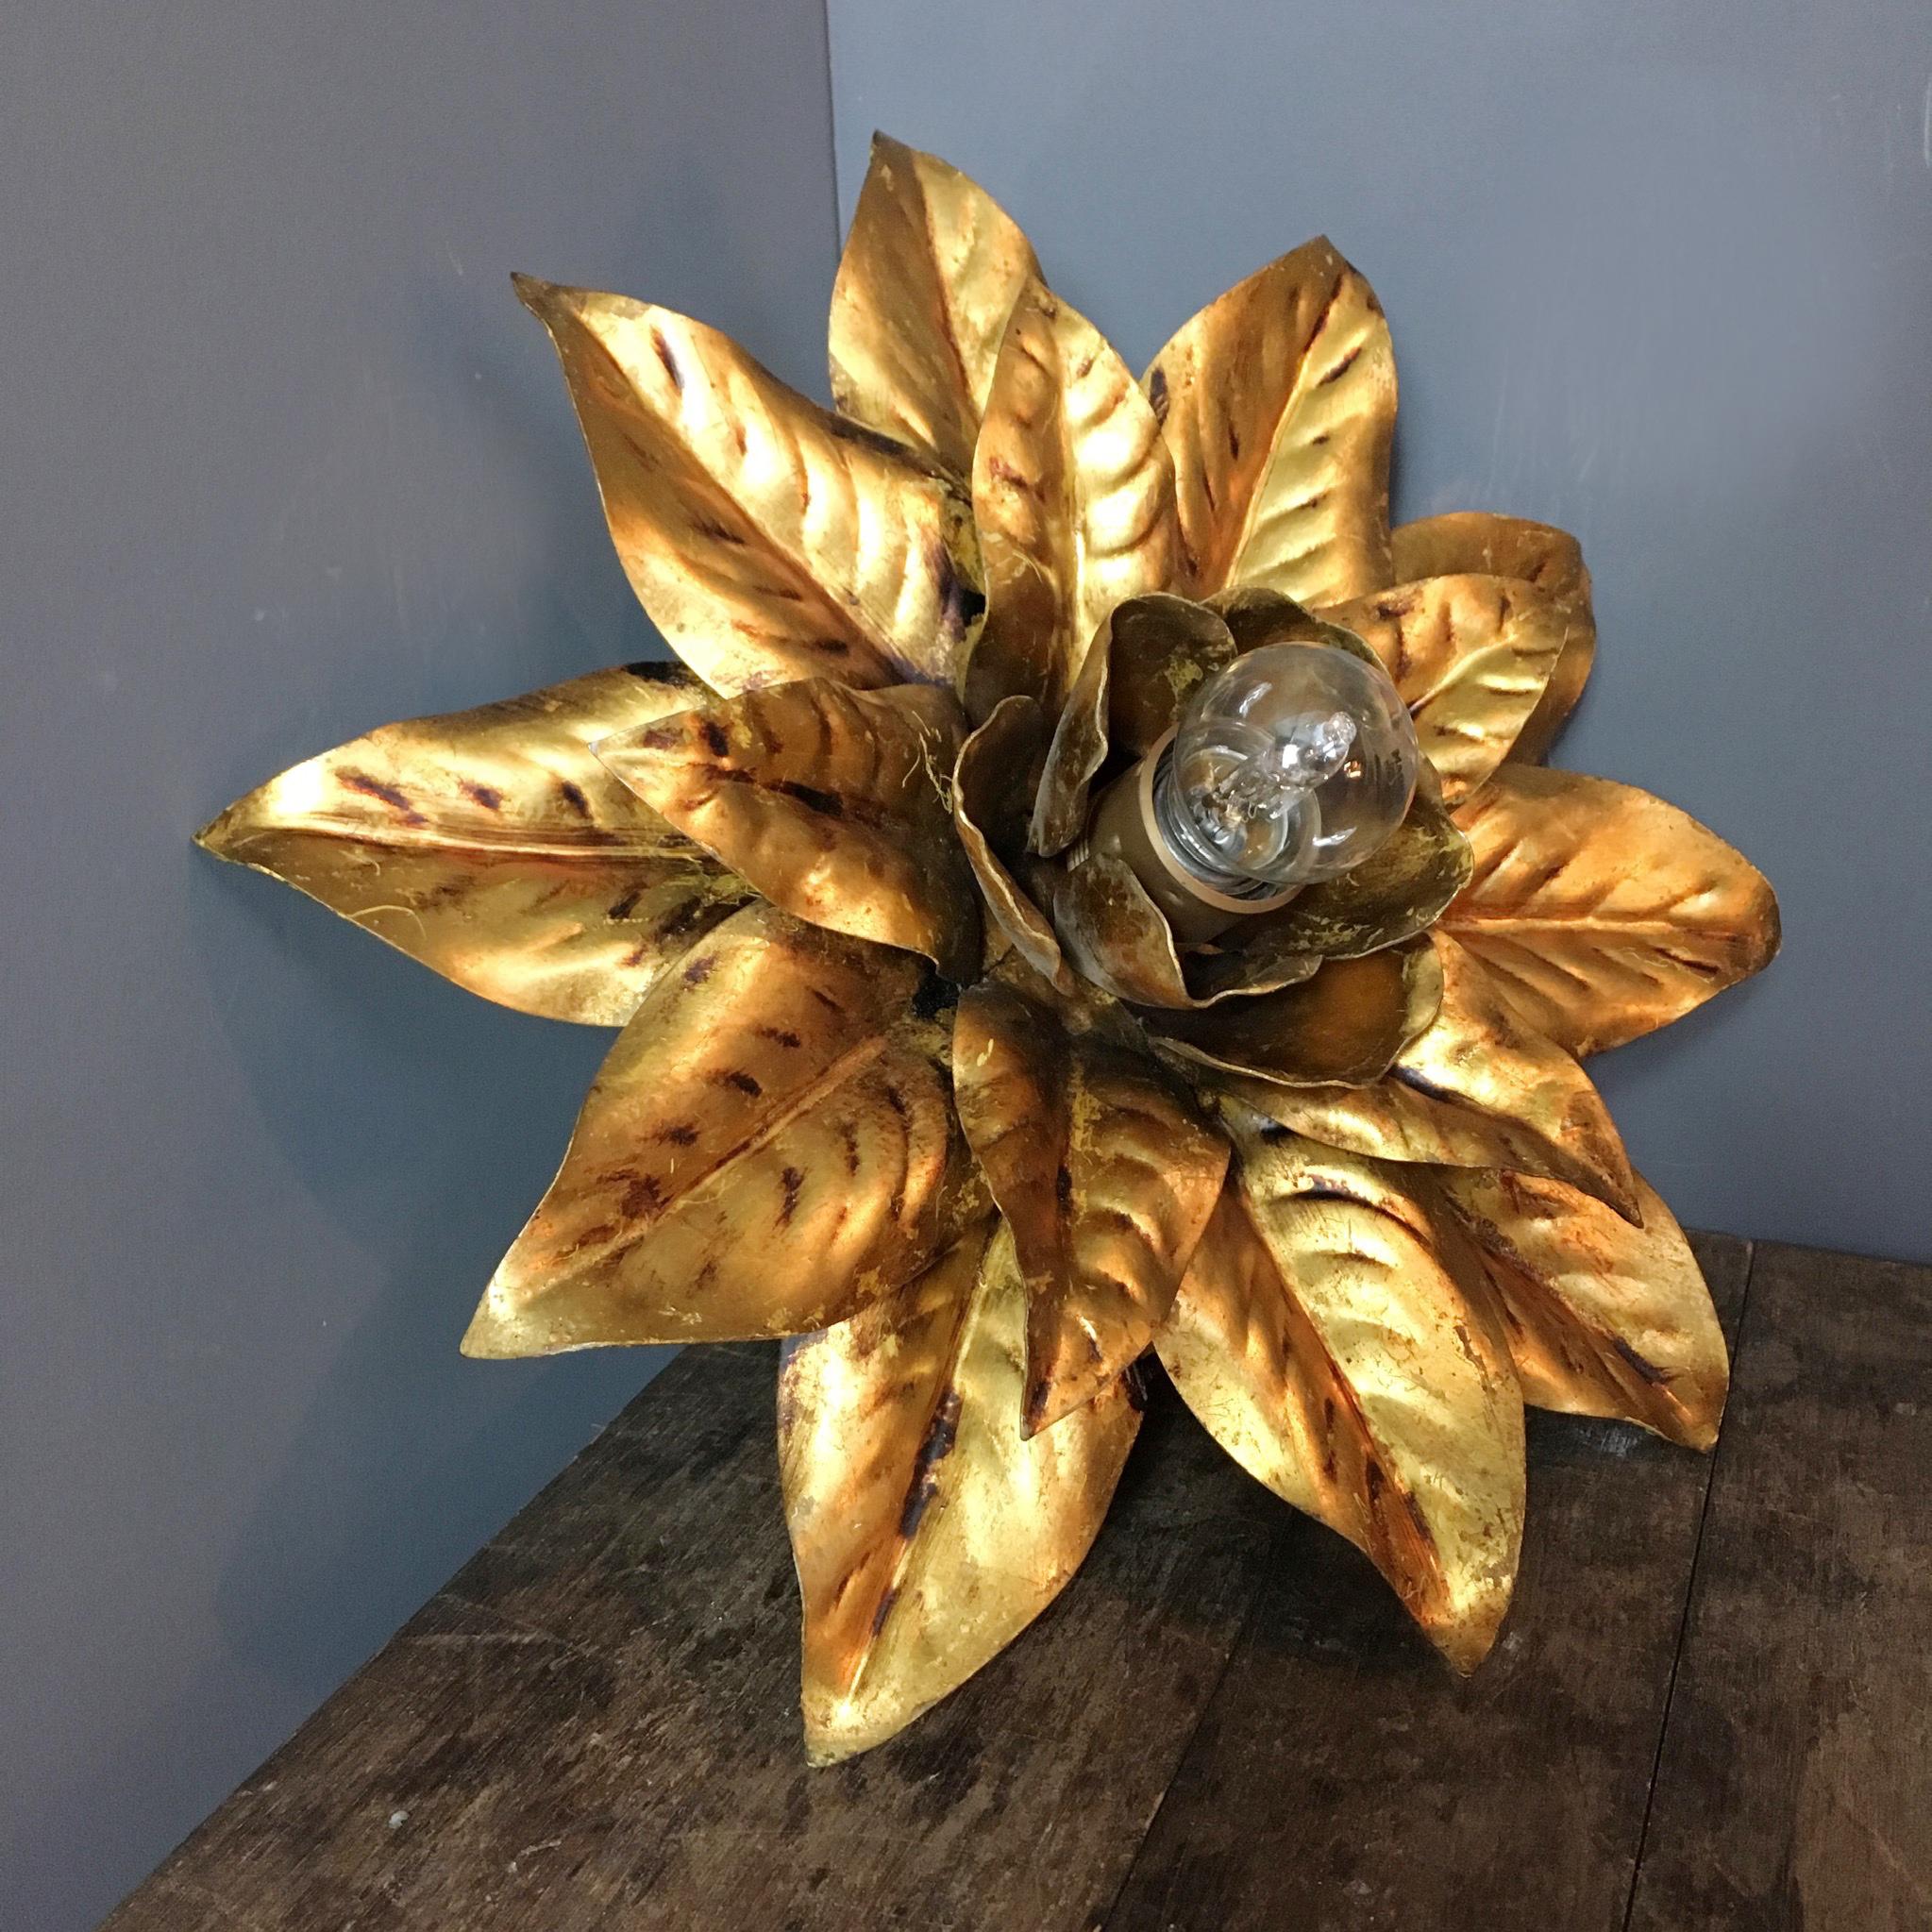 French gilt flower flush light

1970s 

Gilt metal with single E27 screw in centre bulb

The flower light hangs from a scalloped metal rose behind the petals

Measures: 36 cm width / height
13 cm depth (Total depth from ceiling including